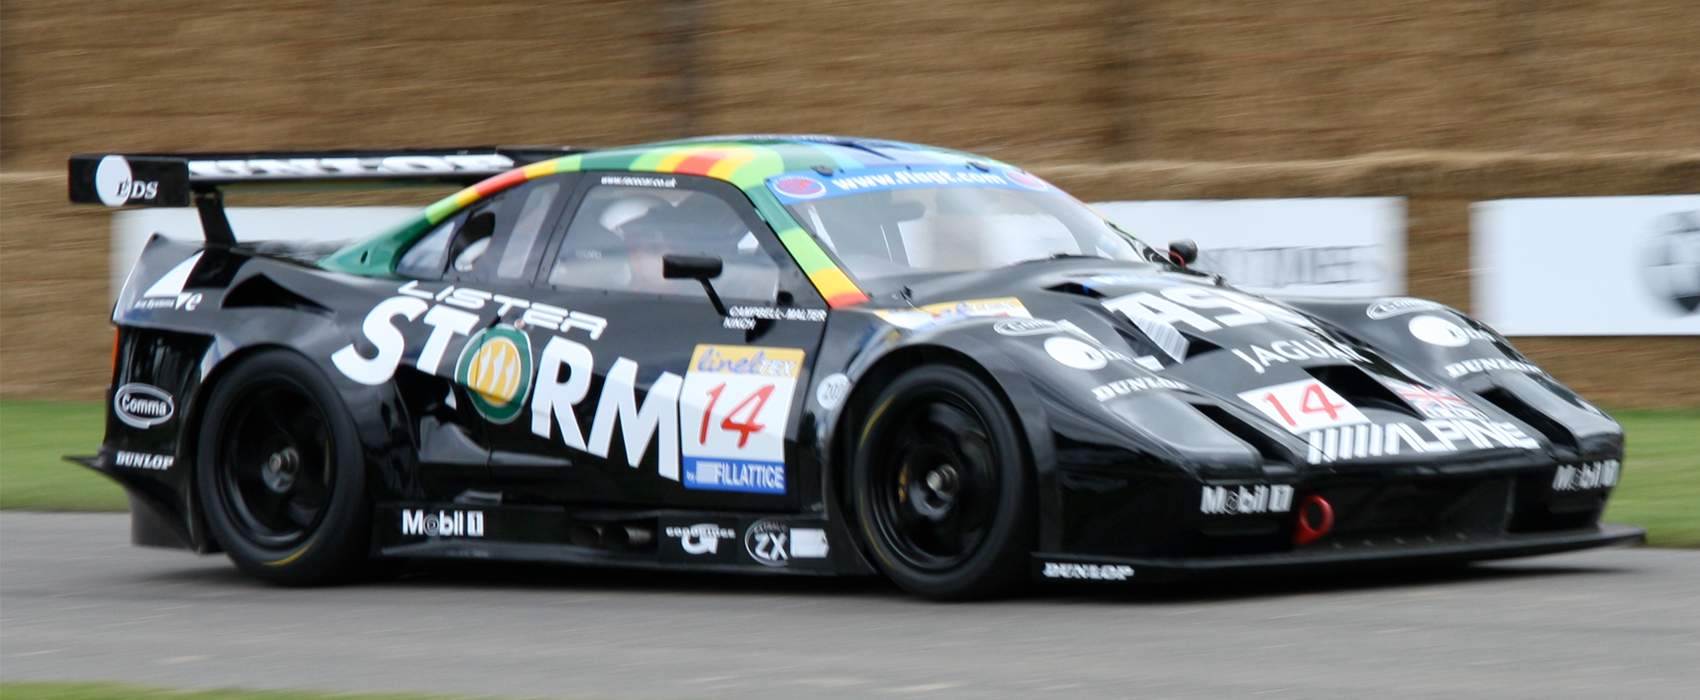 The Lister Storm